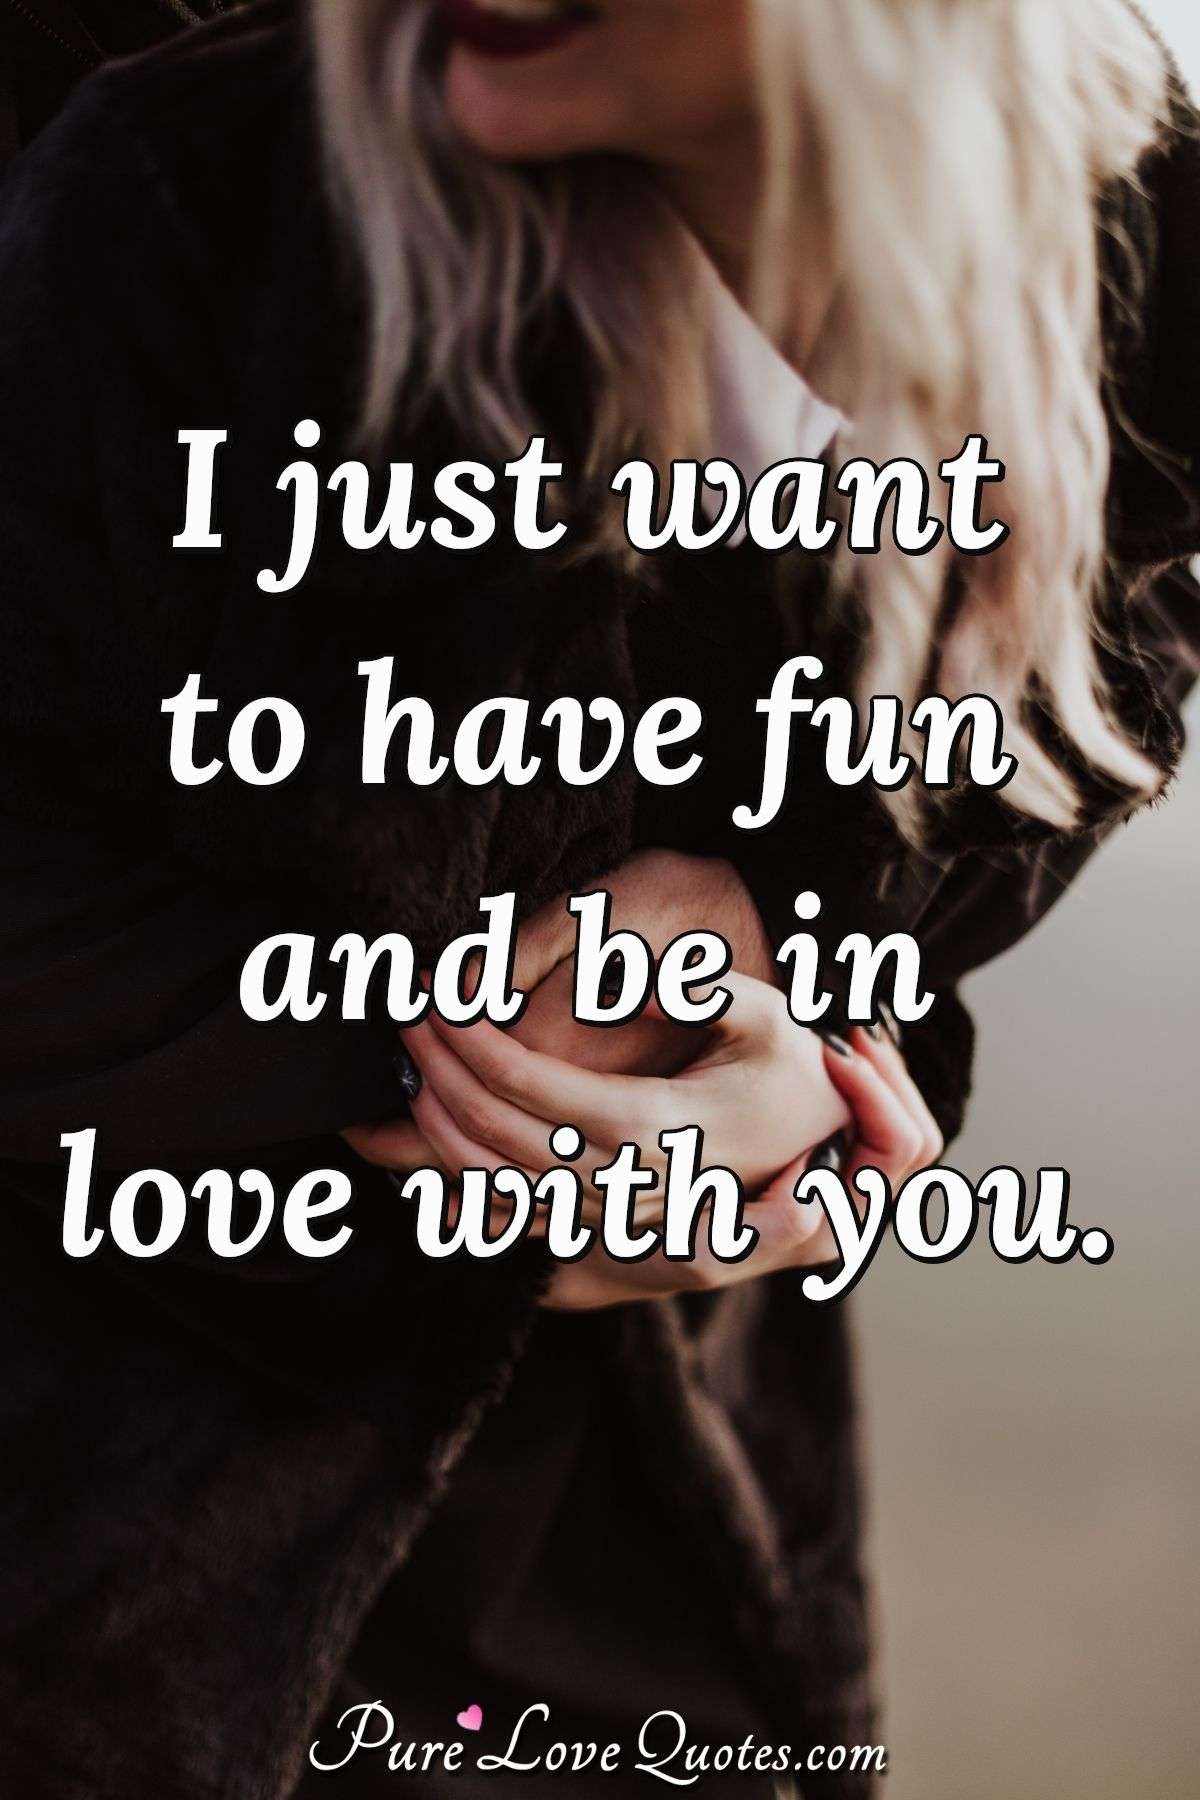 I just want to have fun and be in love with you. - Anonymous